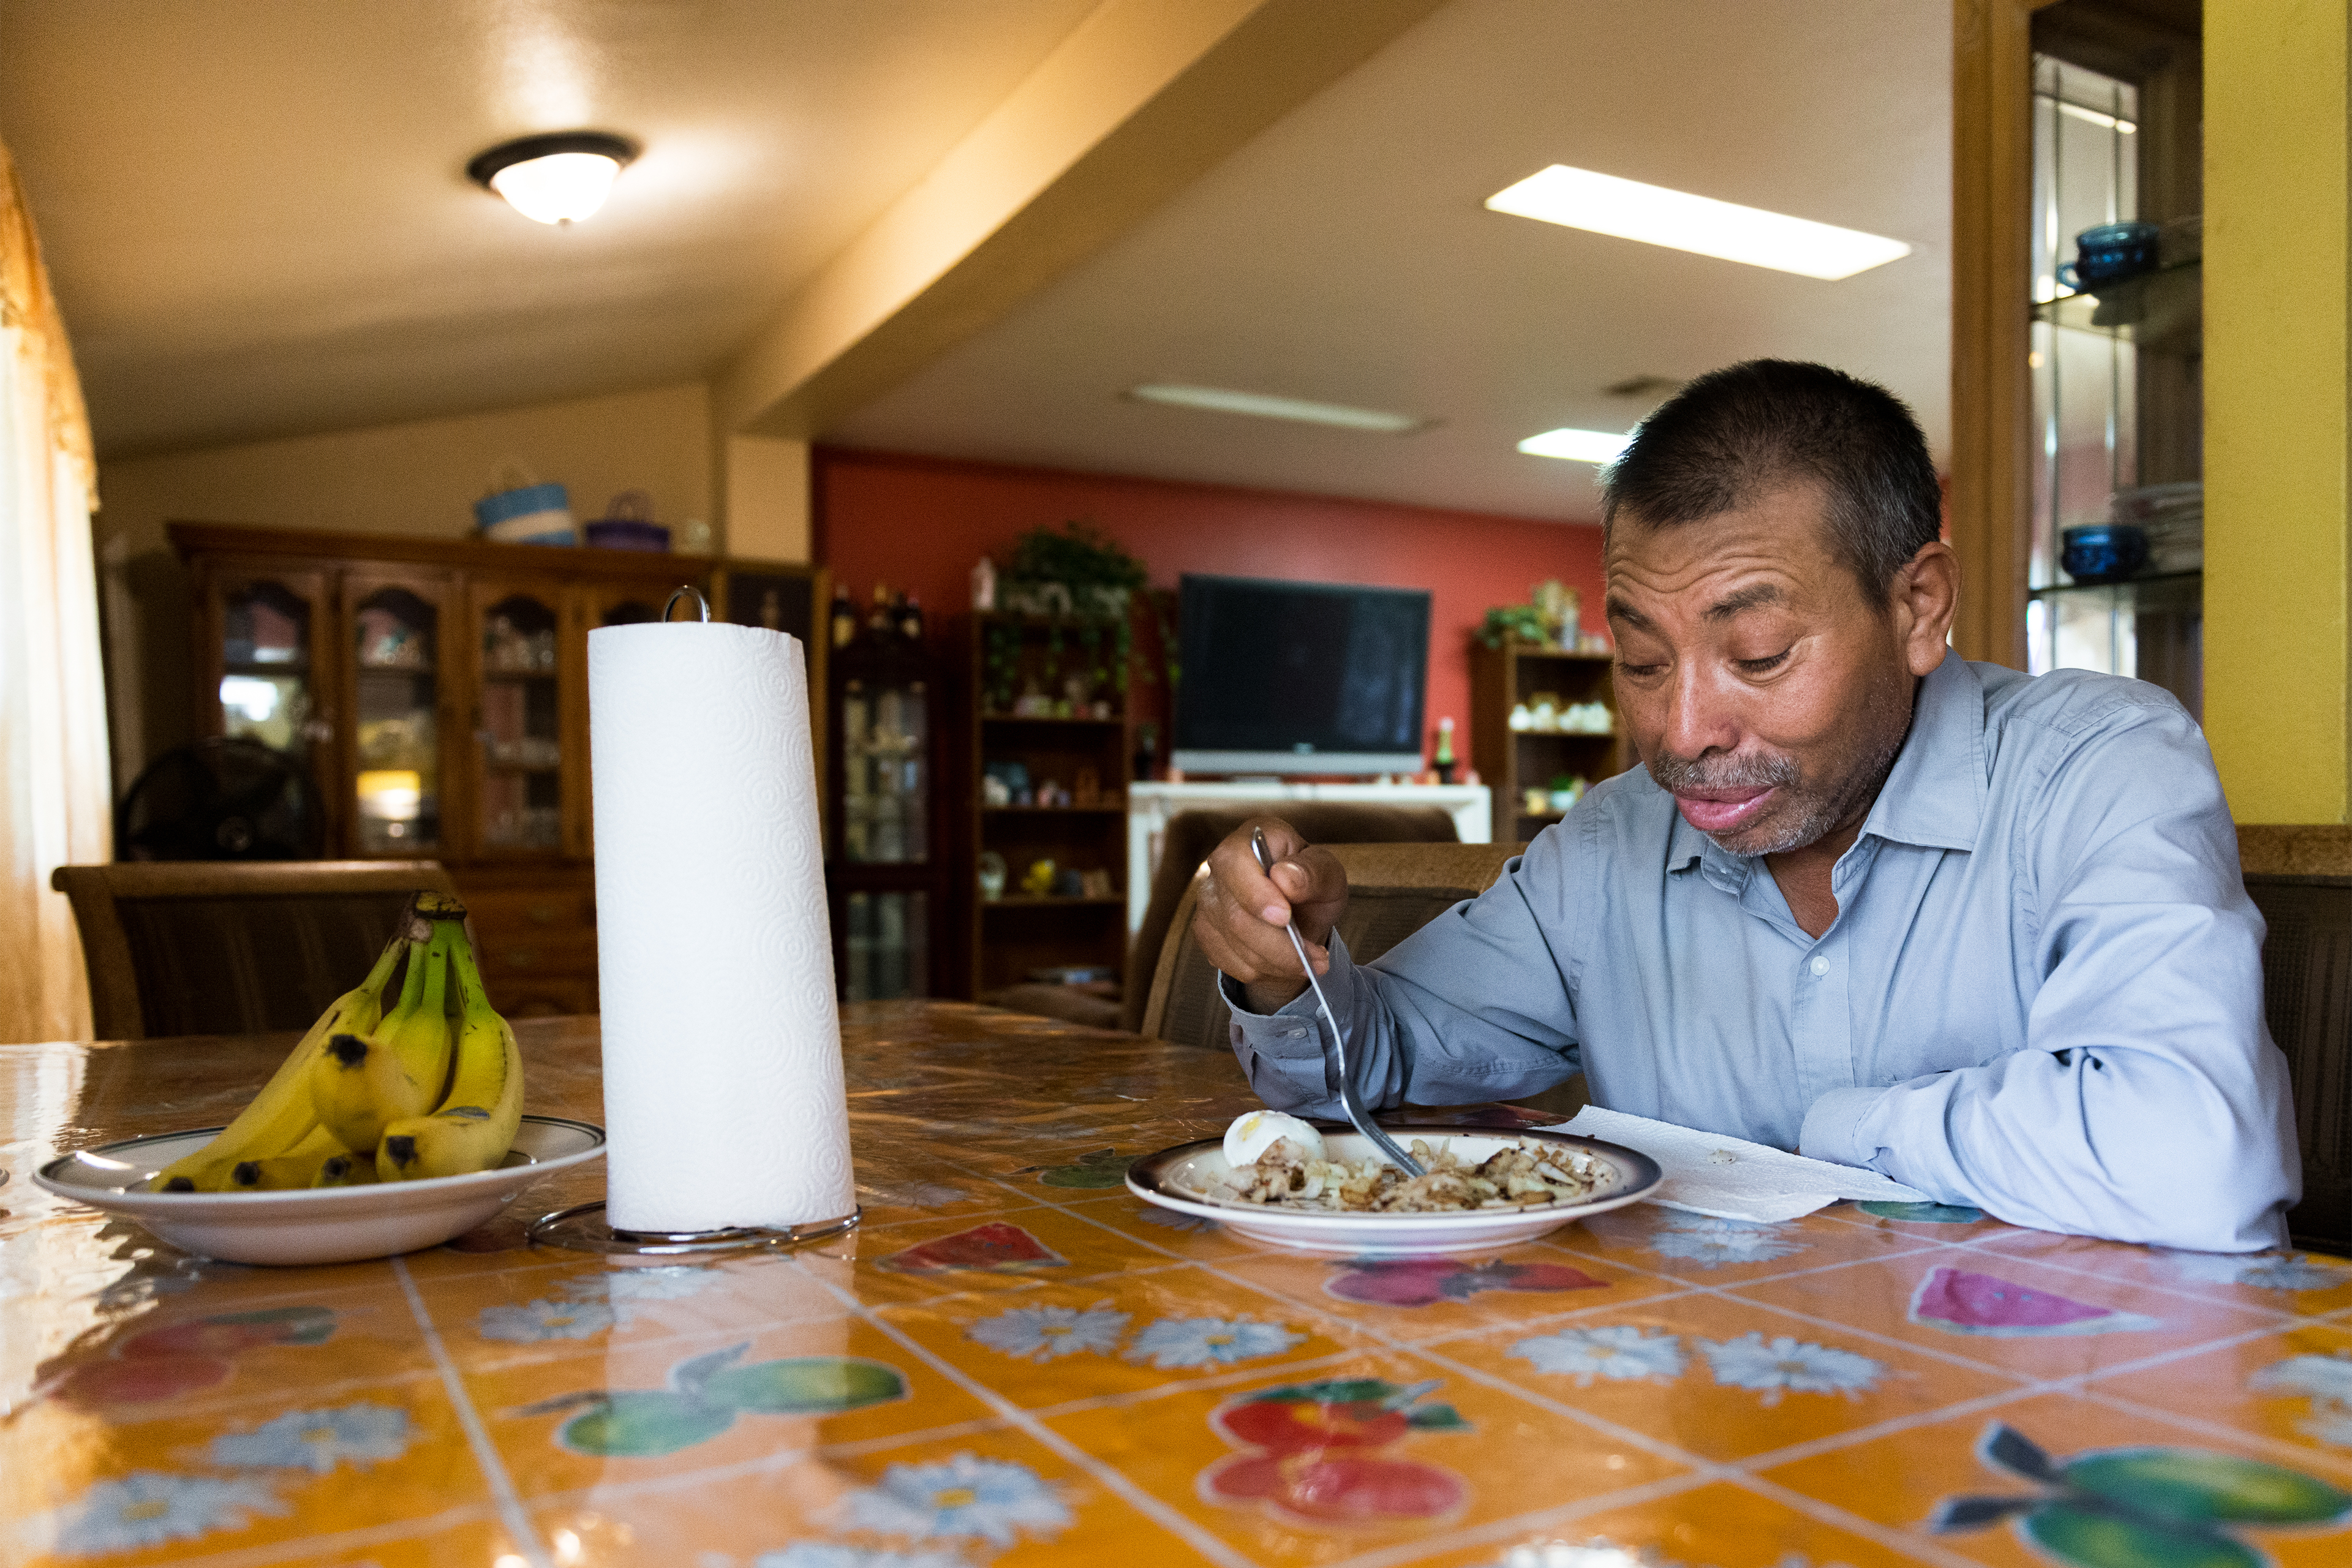 Vidal Fonseca is seen eating at a table at home. A roll of paper towels and a plate of bananas are also on the table.